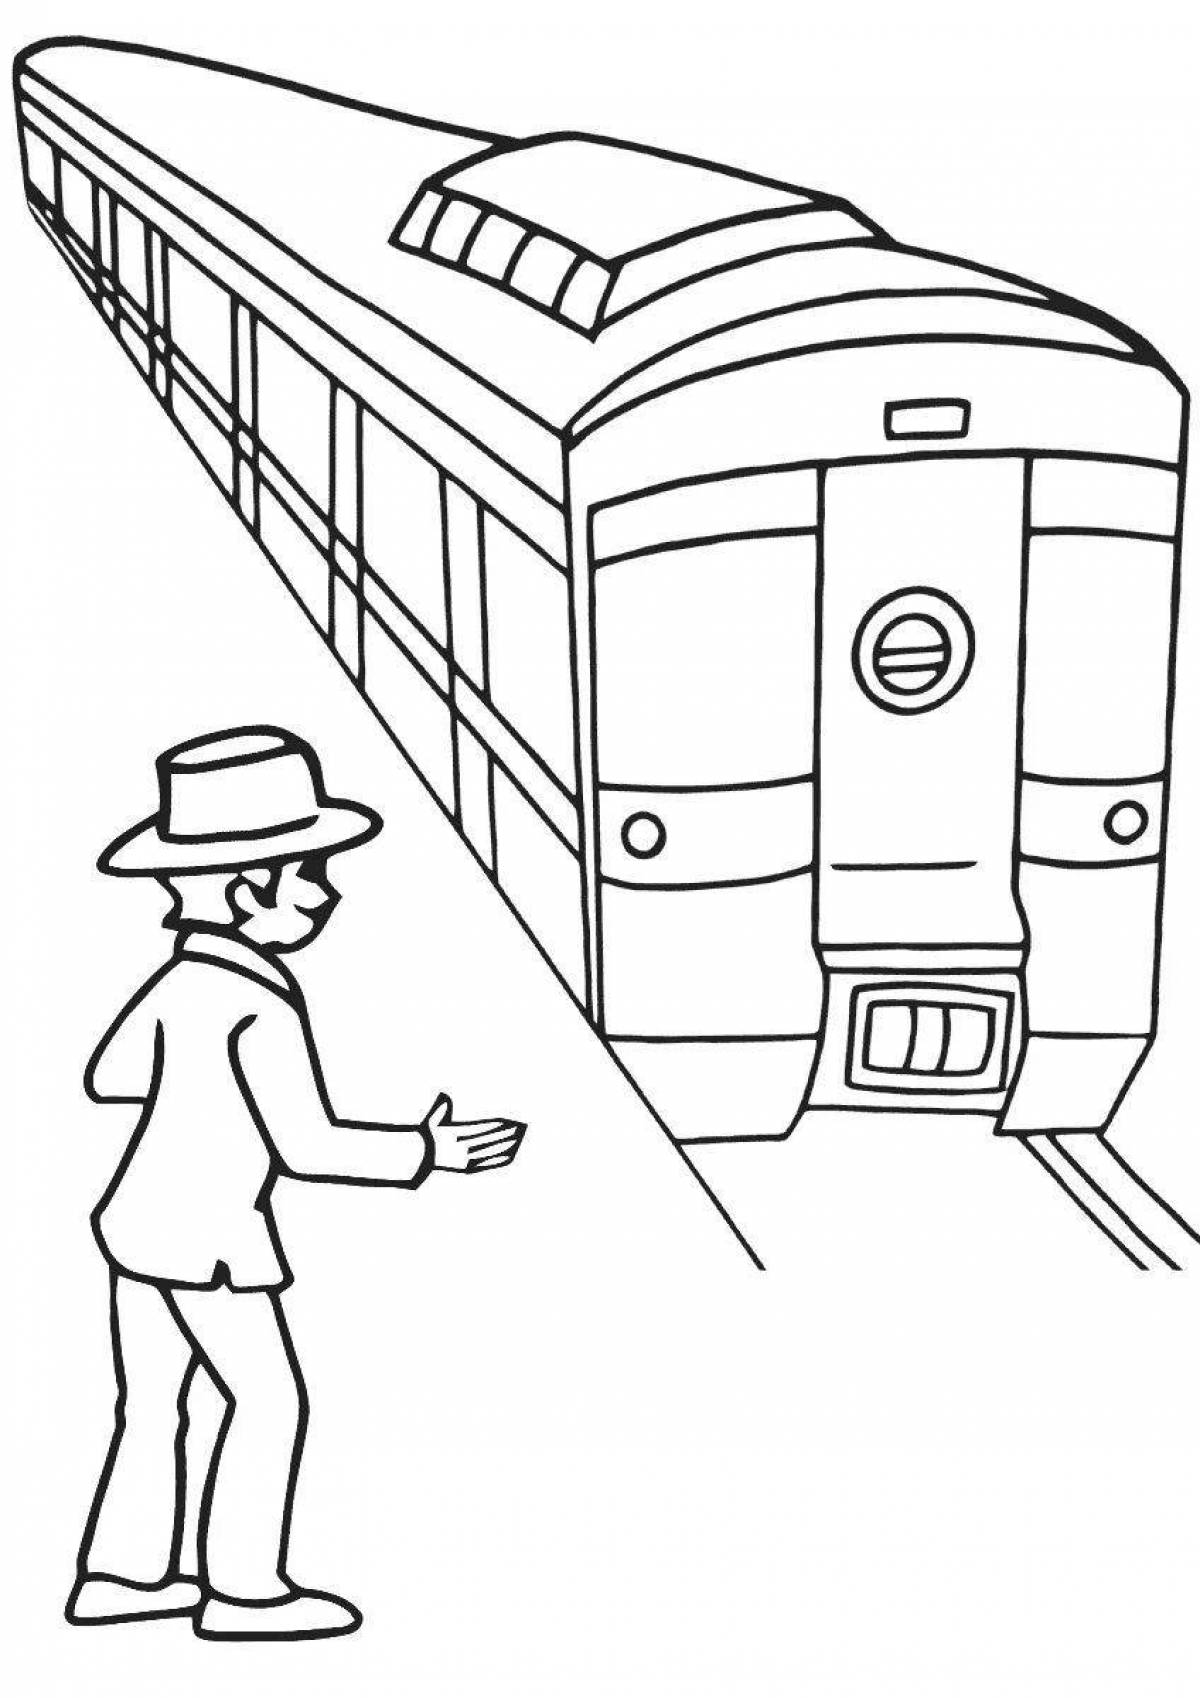 Coloring book nice train station for kids